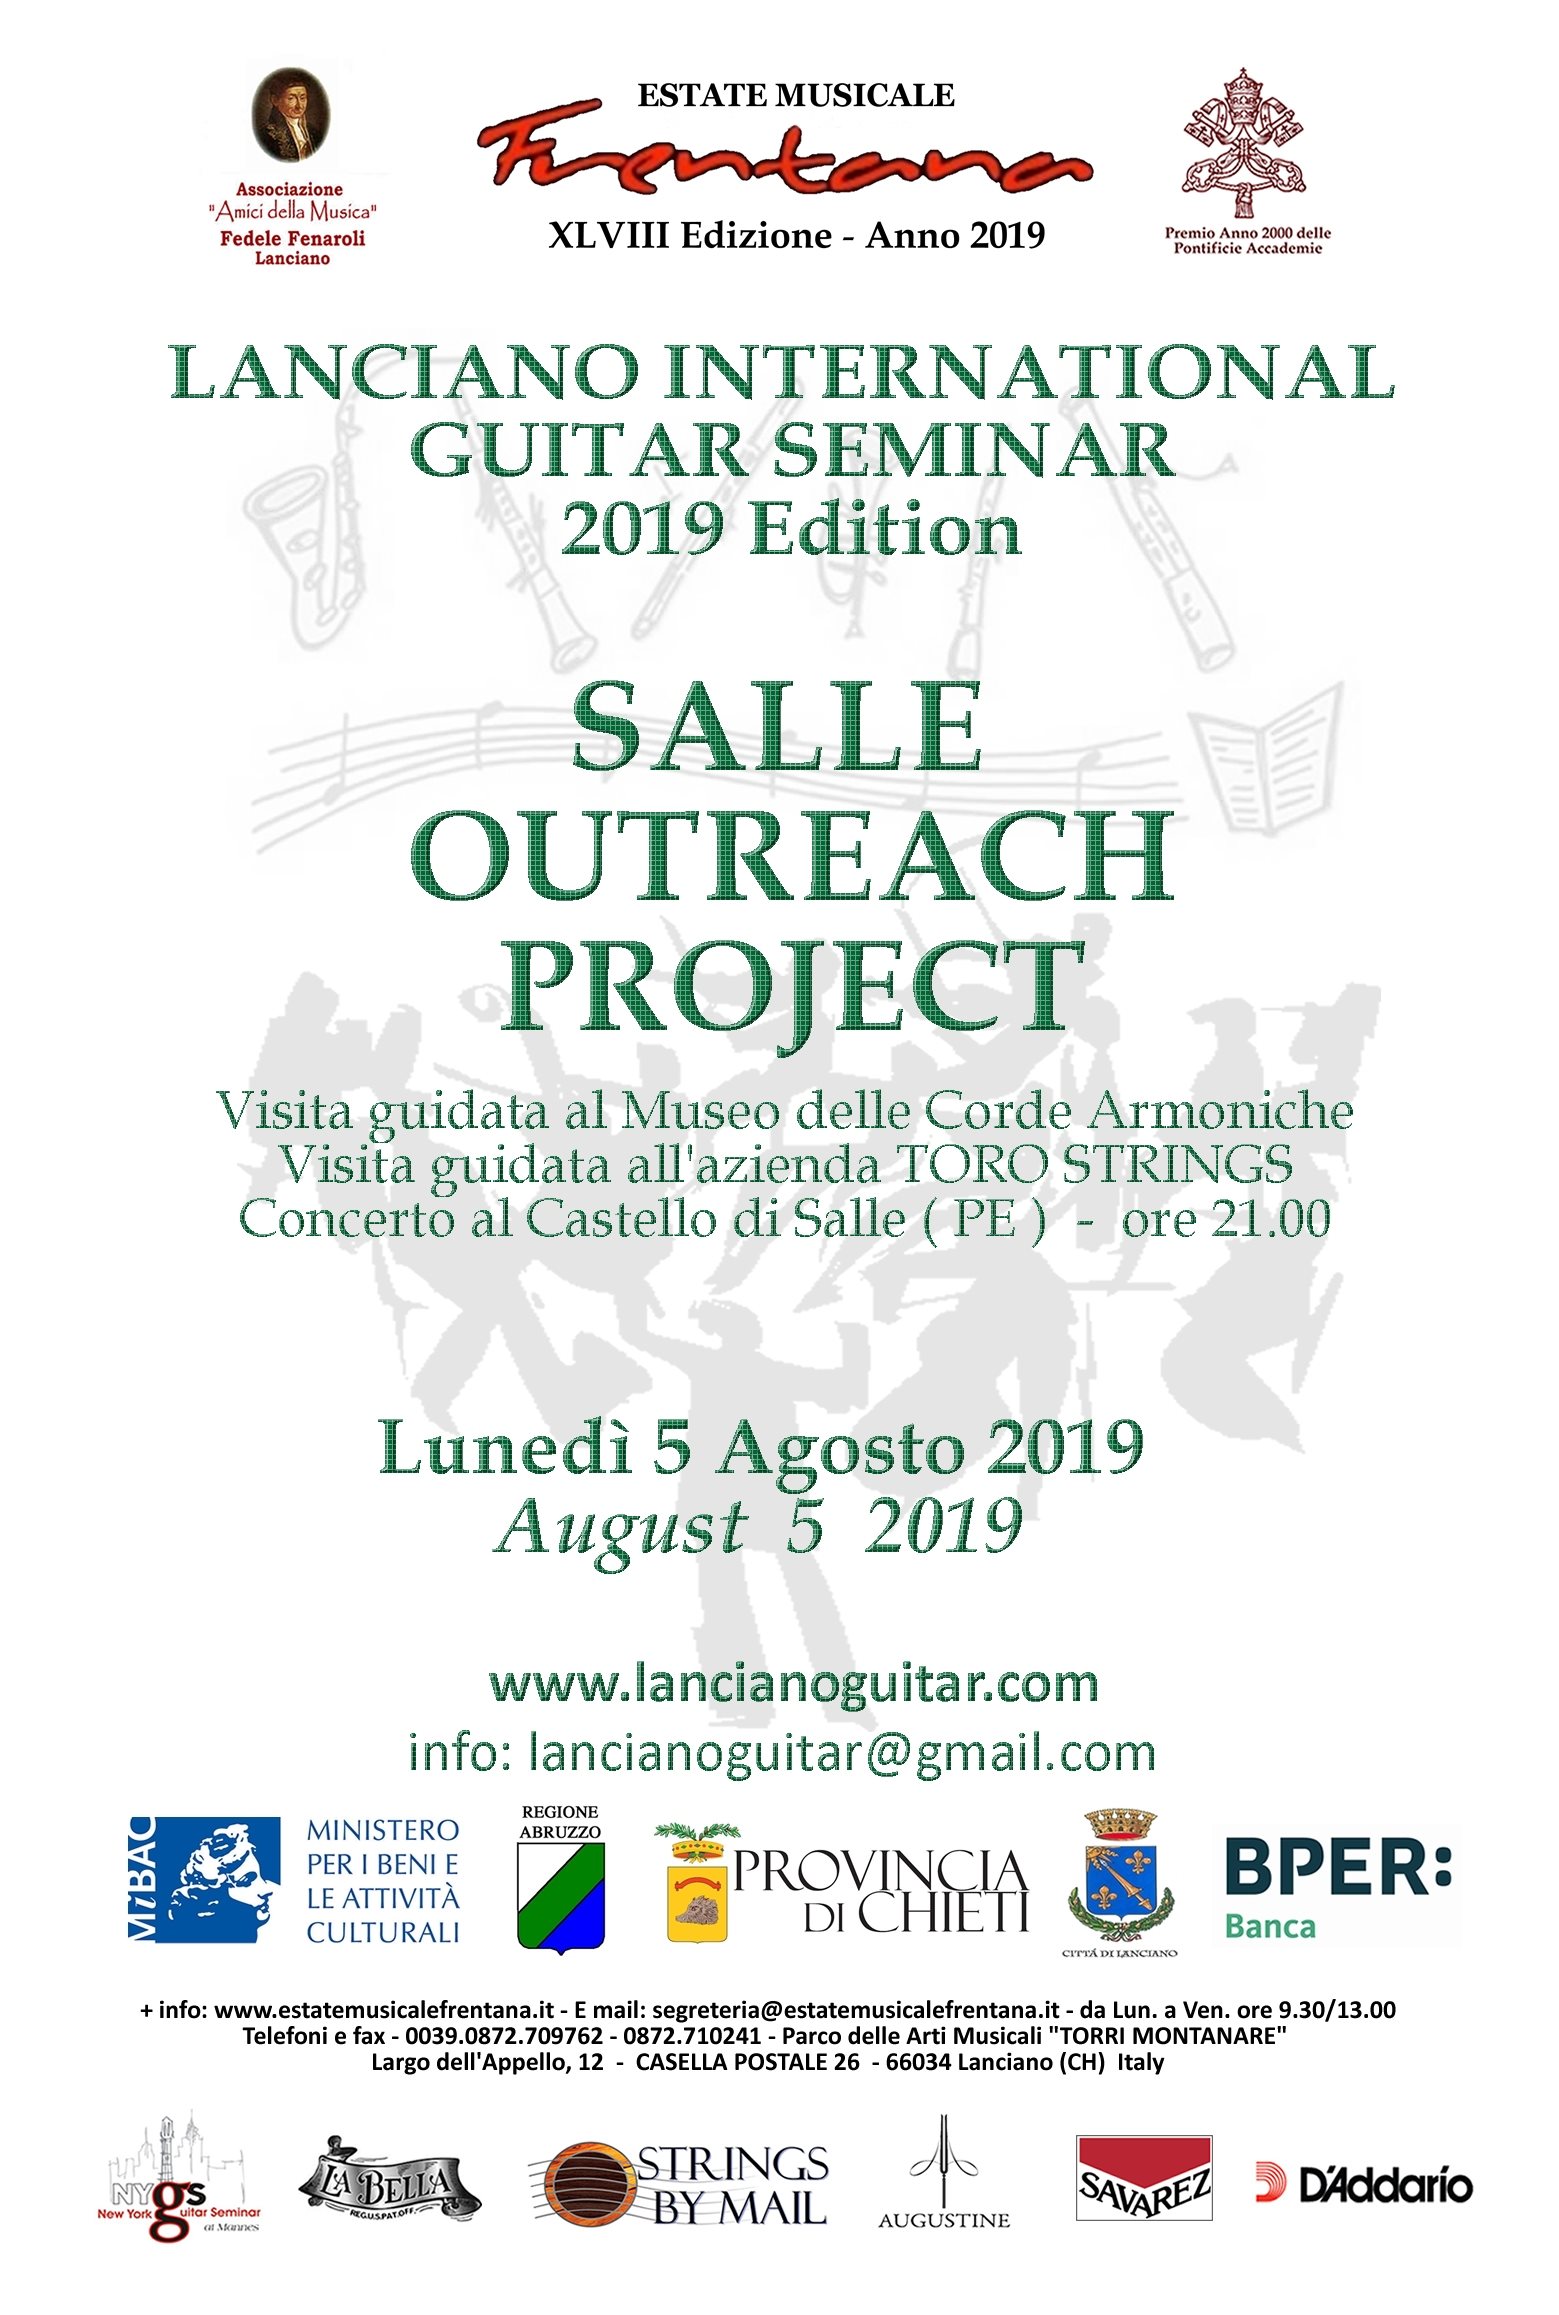 "Salle Outreach Project"